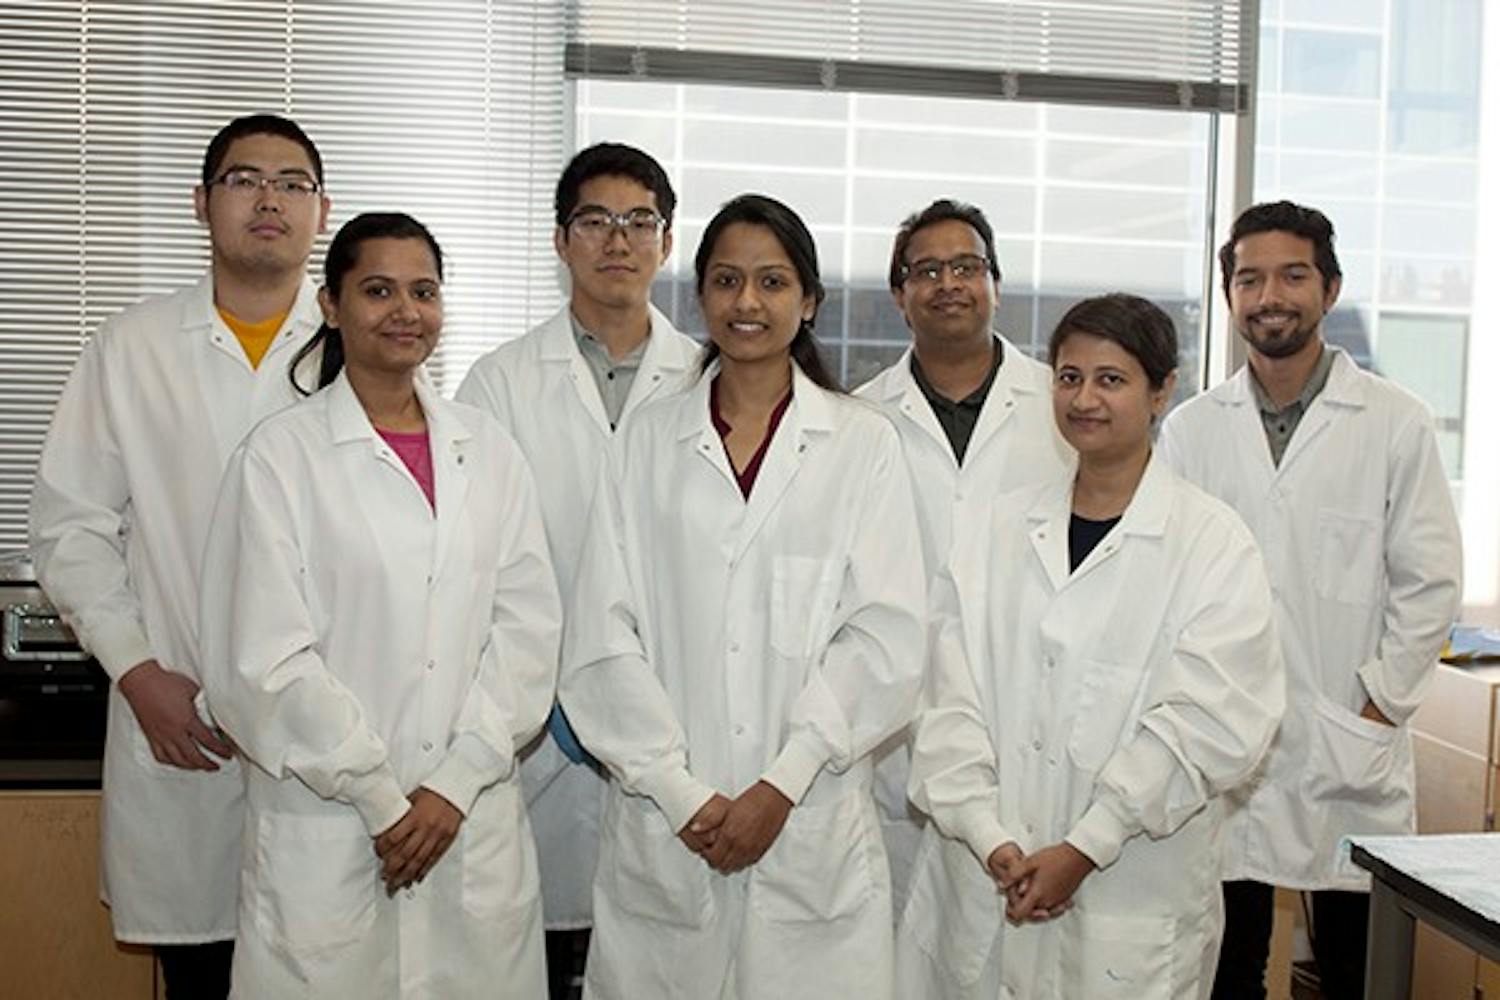 (Back row from left to right) Graduate biomedical students Haiqing Wang and Tyson Tsutsumi, Professor Vikram Kodibagkar, and graduate biomedical student Carlos Renturia, (front row from left to right) biomedical doctoral students Shubhangi Agasuial, Vimala N. Bharadway, and Rohini Vidya Shankar, are part of a research team supported by the National Science Foundation. Exploring new imaging techniques, they aim to discern the correlation between aggressive tumors and oxygen deficiency in cells. (Photo by Mario Mendez)